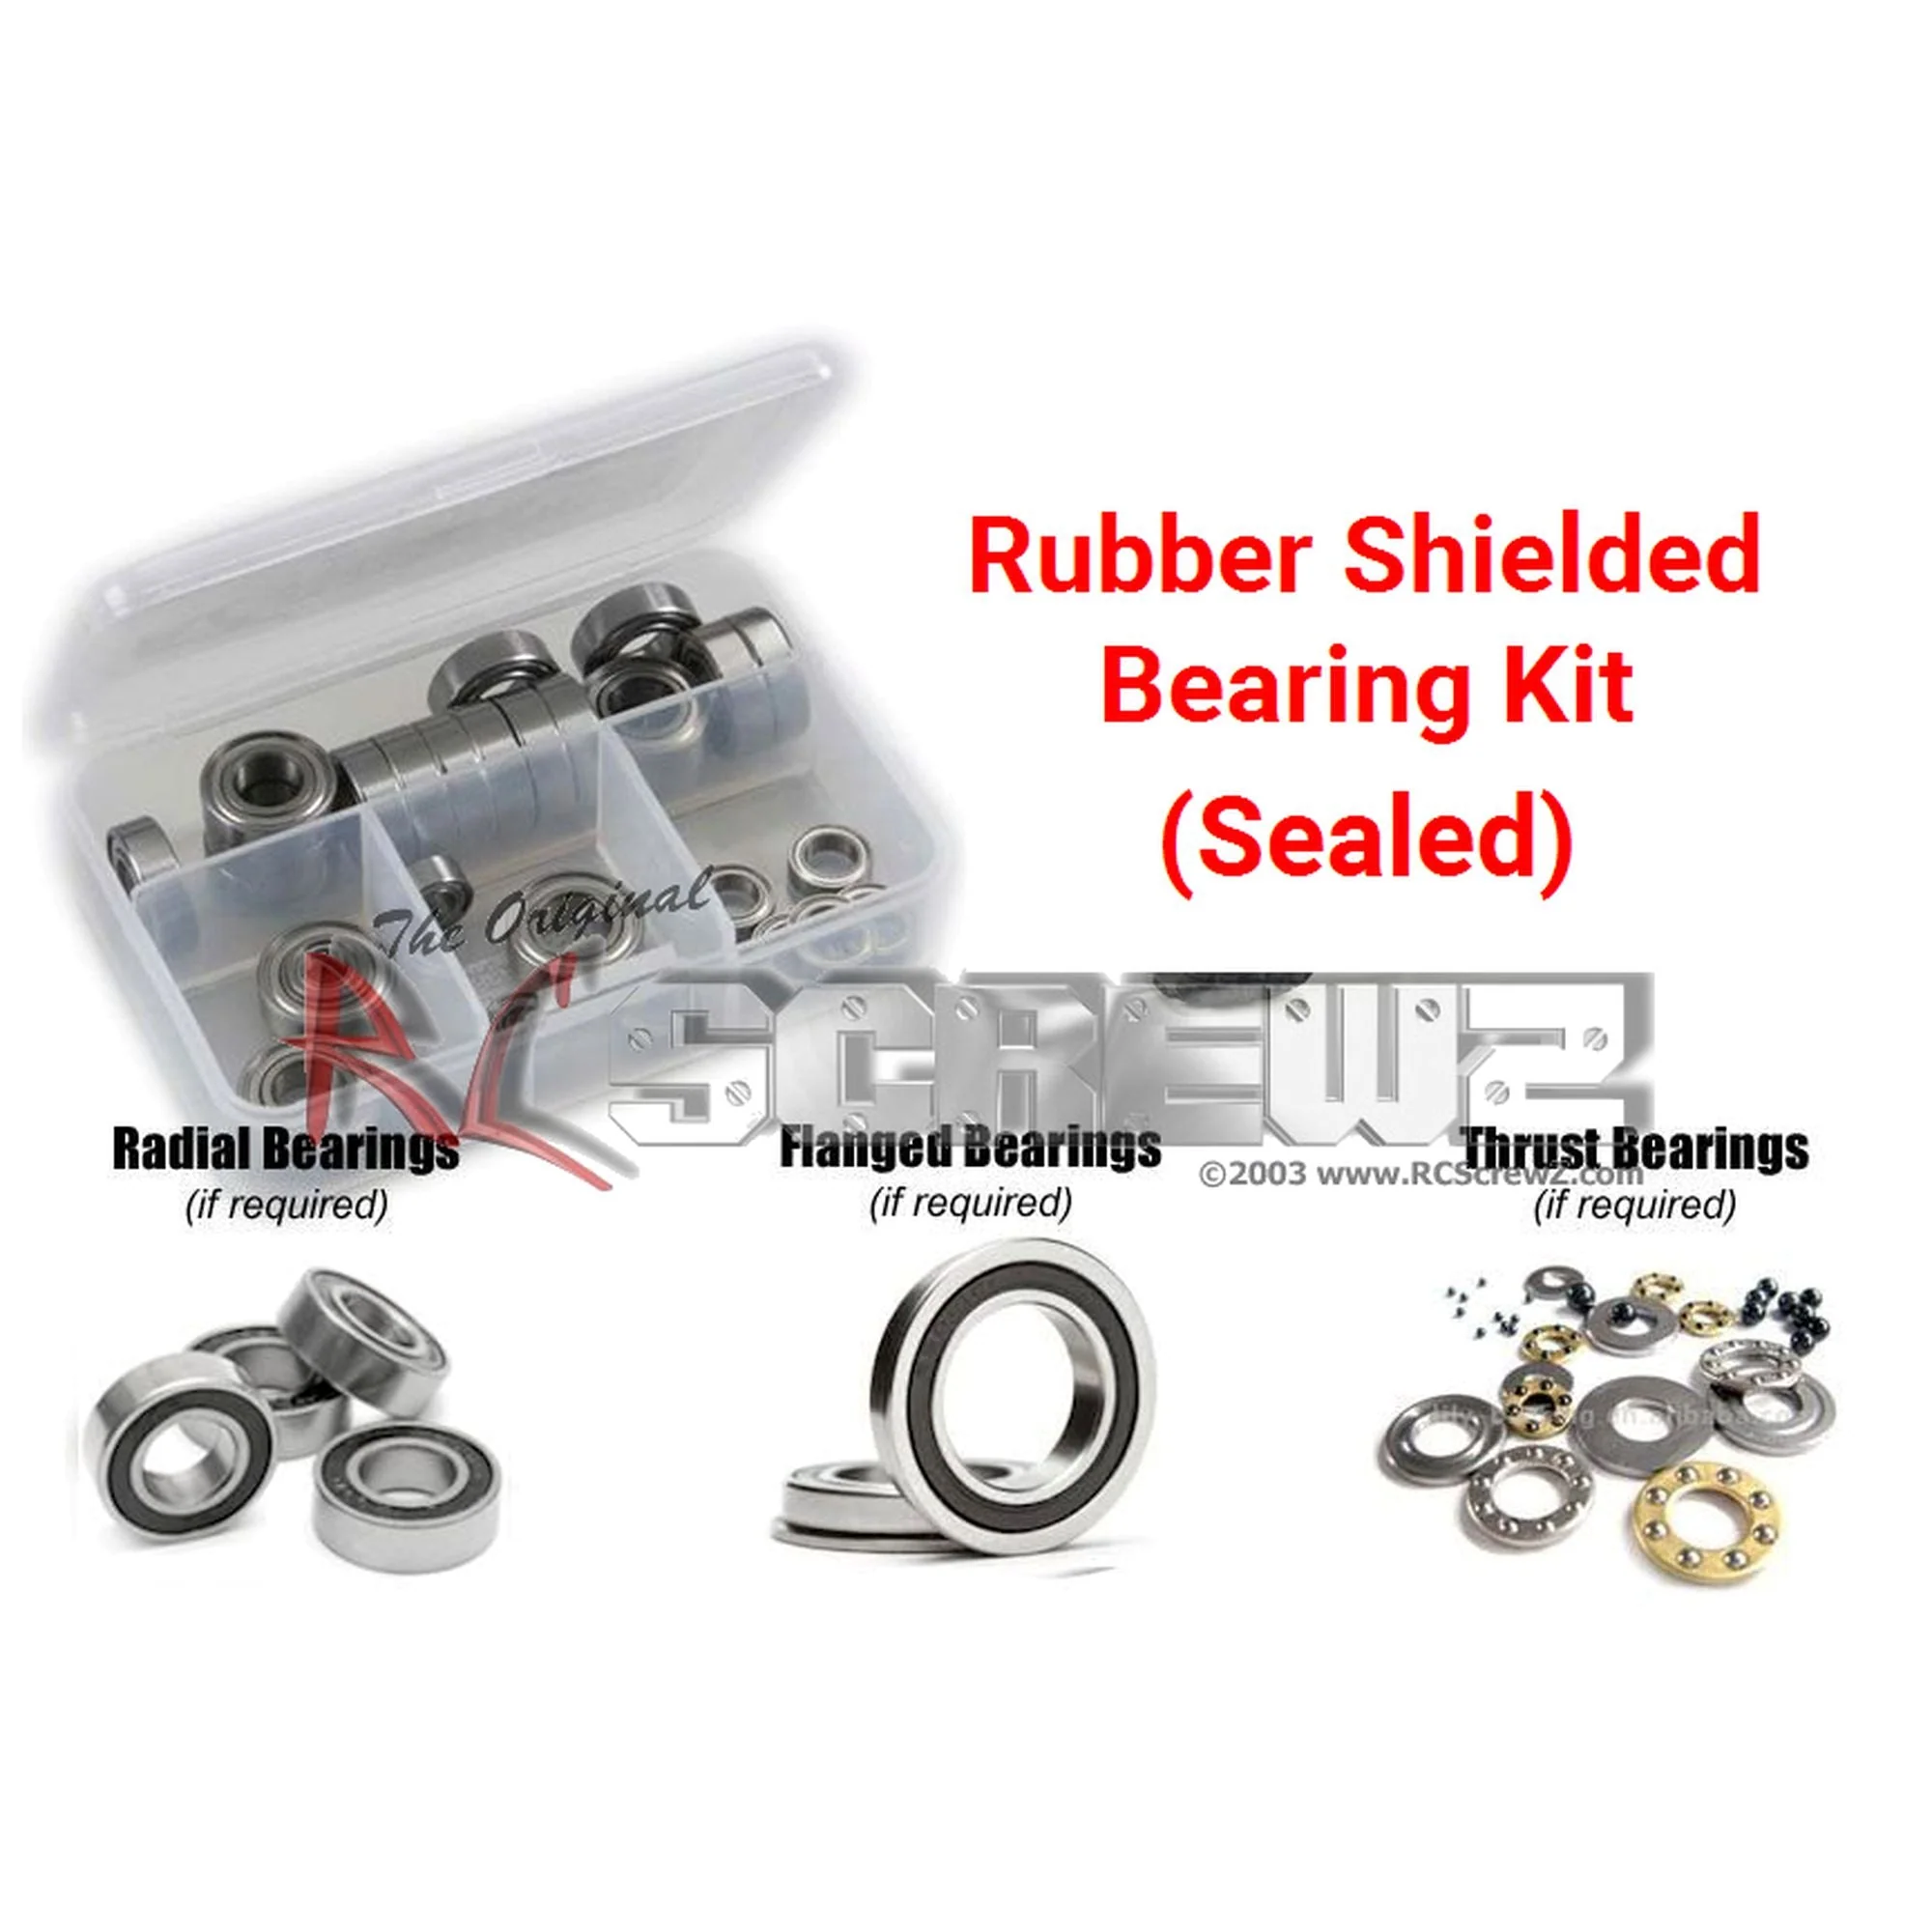 RCScrewZ Rubber Shielded Bearing Kit kyo104r for Kyosho Mini-Z MR-02 Series - Picture 1 of 12